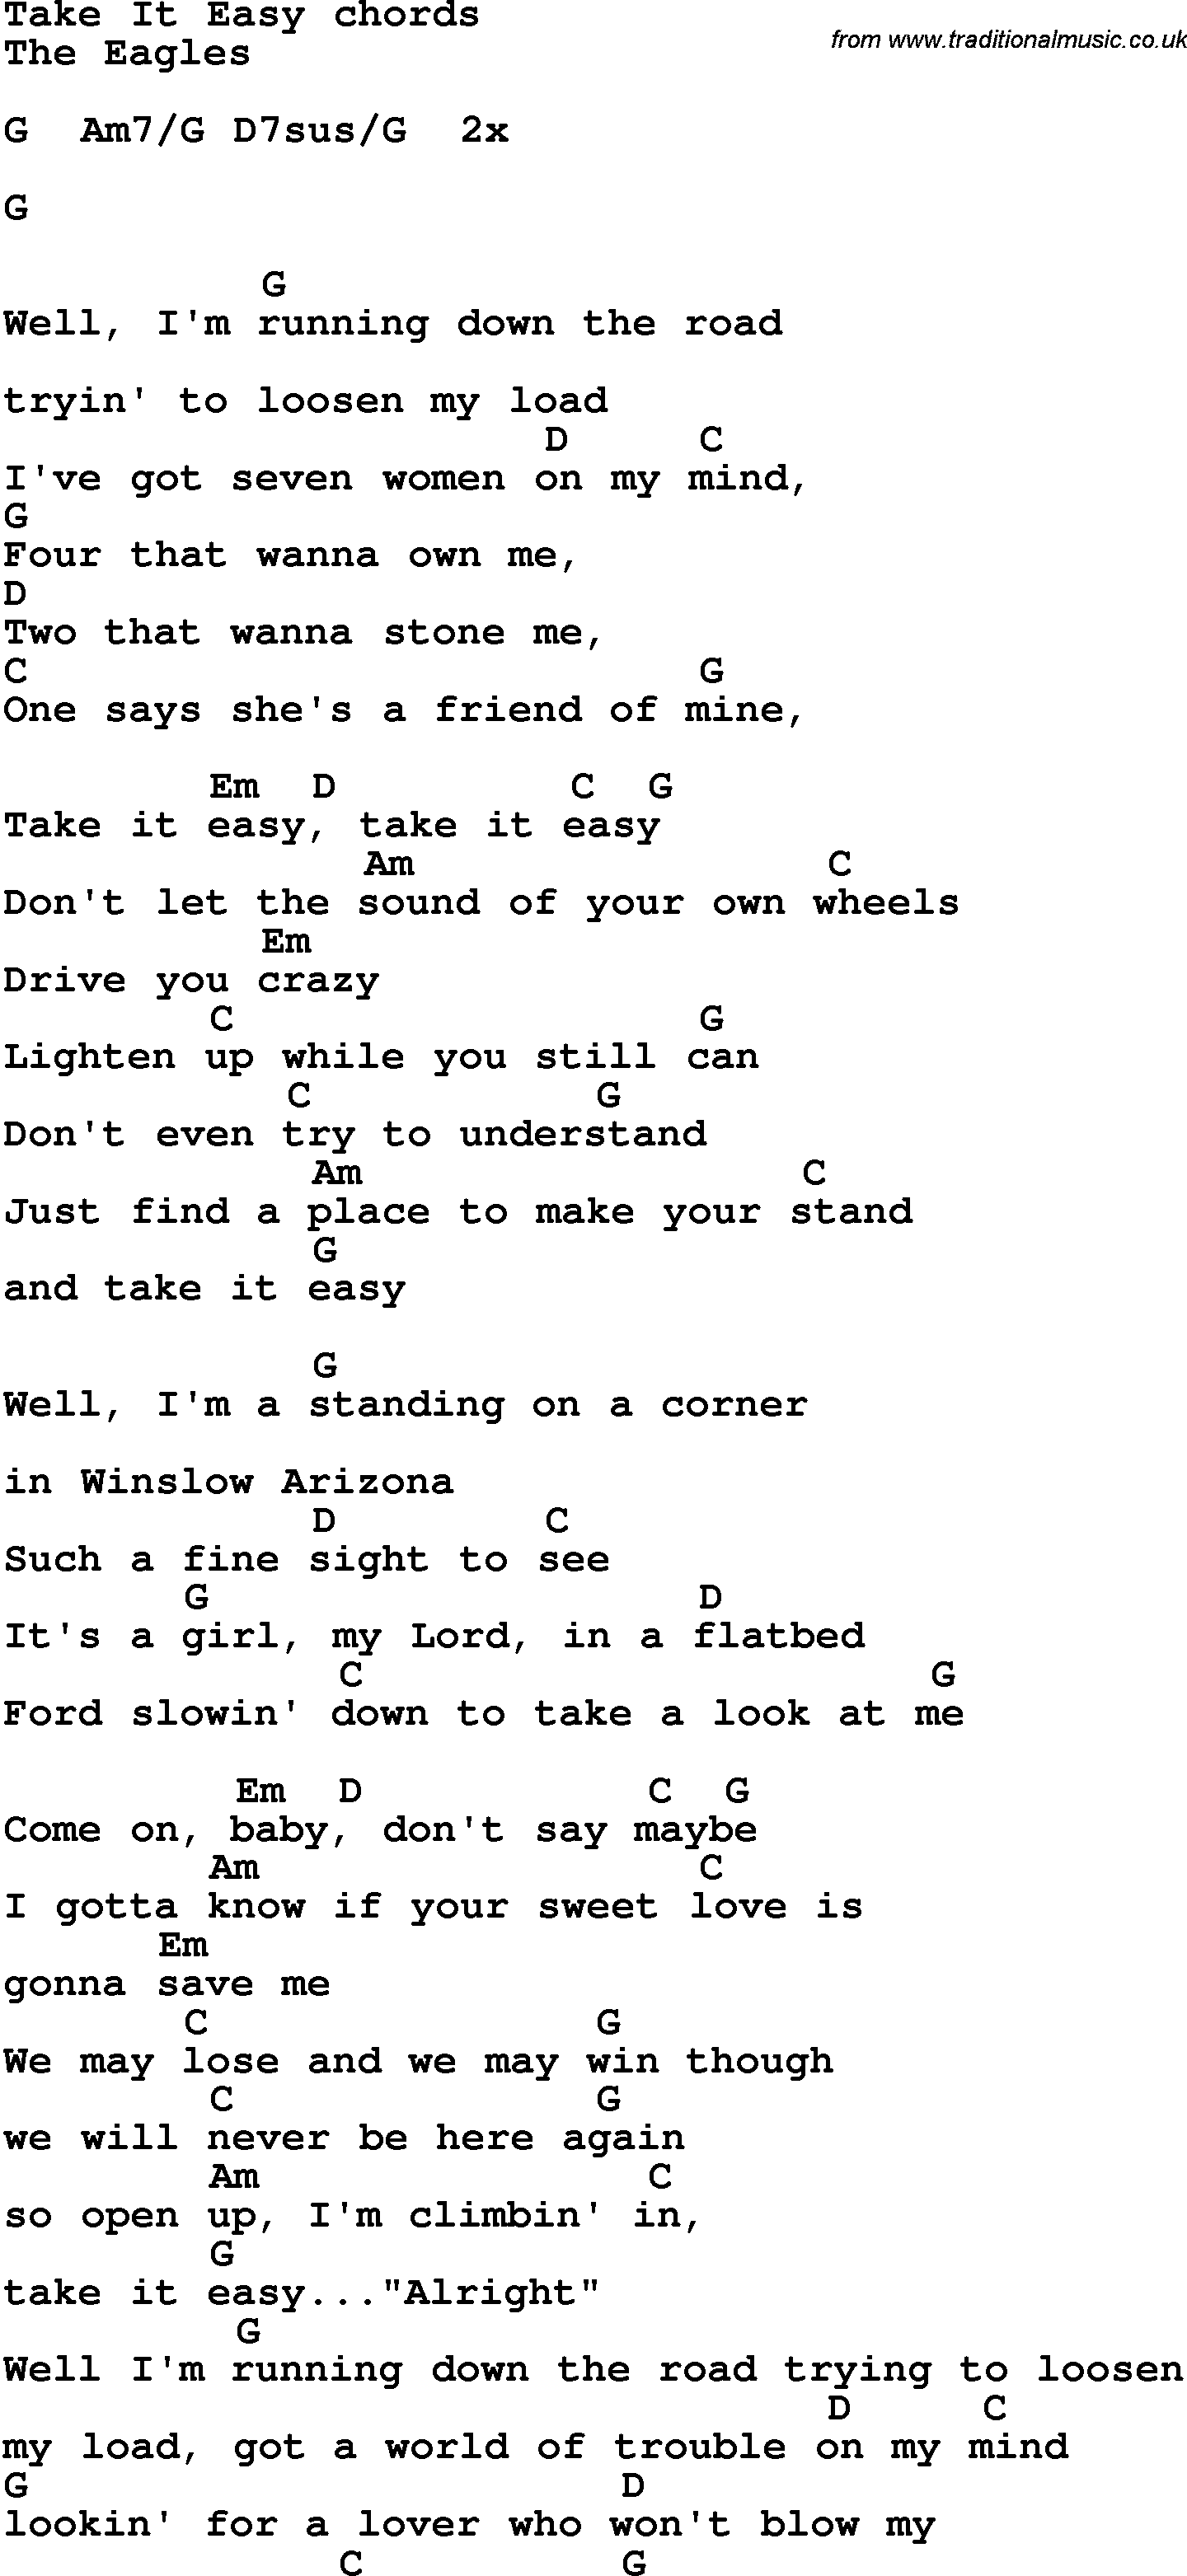 Song Lyrics with guitar chords for Take It Easy - The Eagles